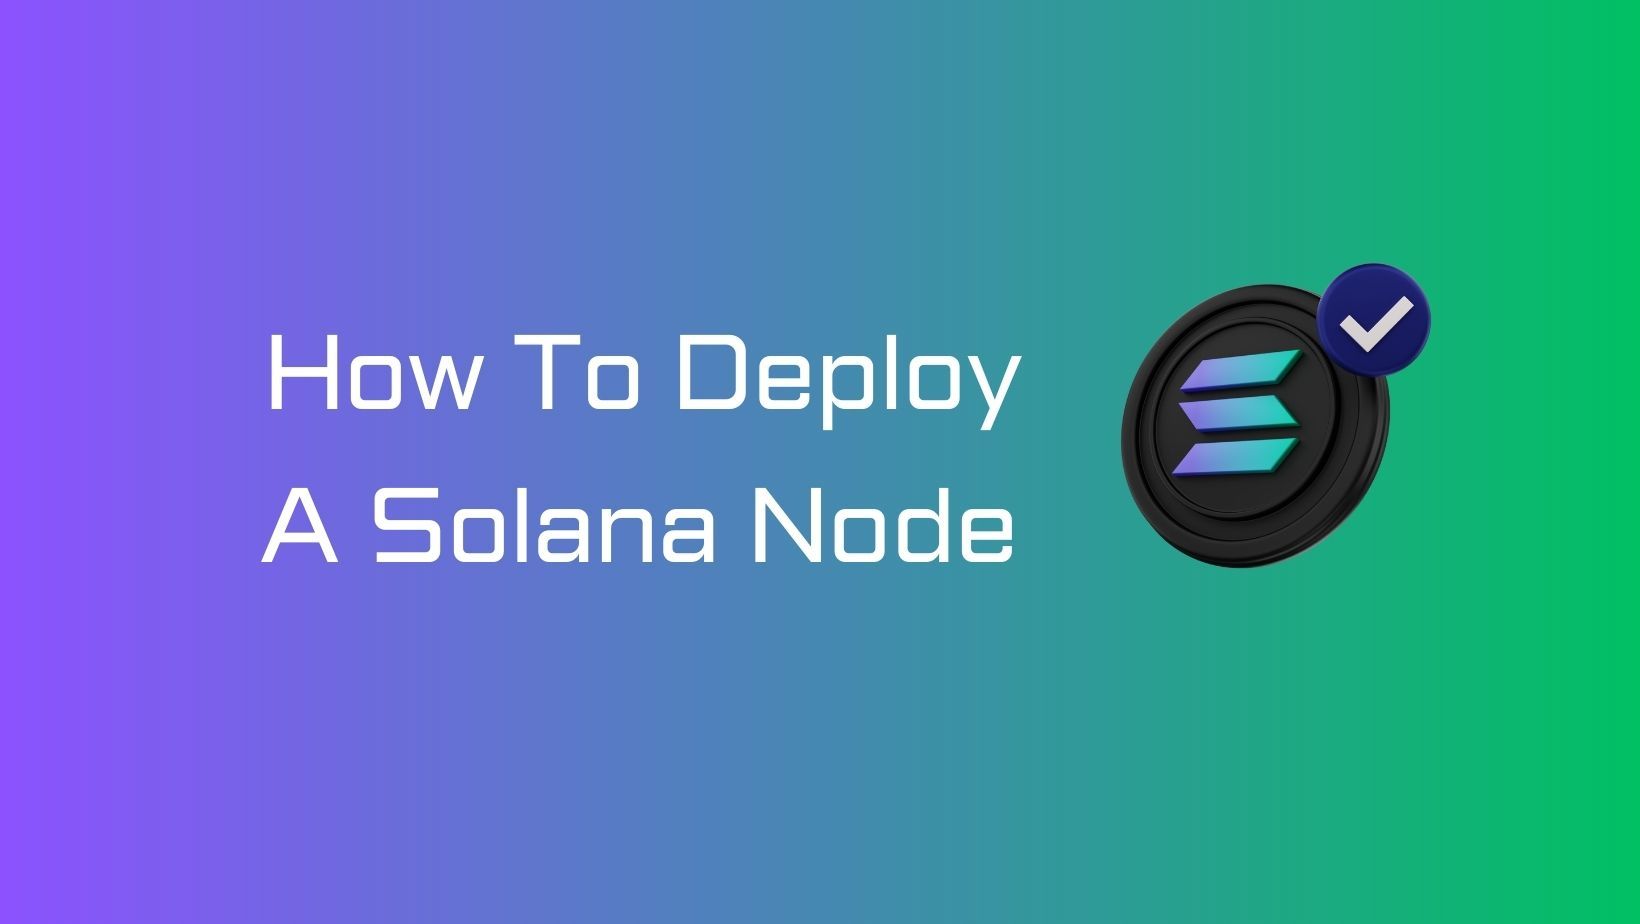 How to Deploy a Solana Node on Linux